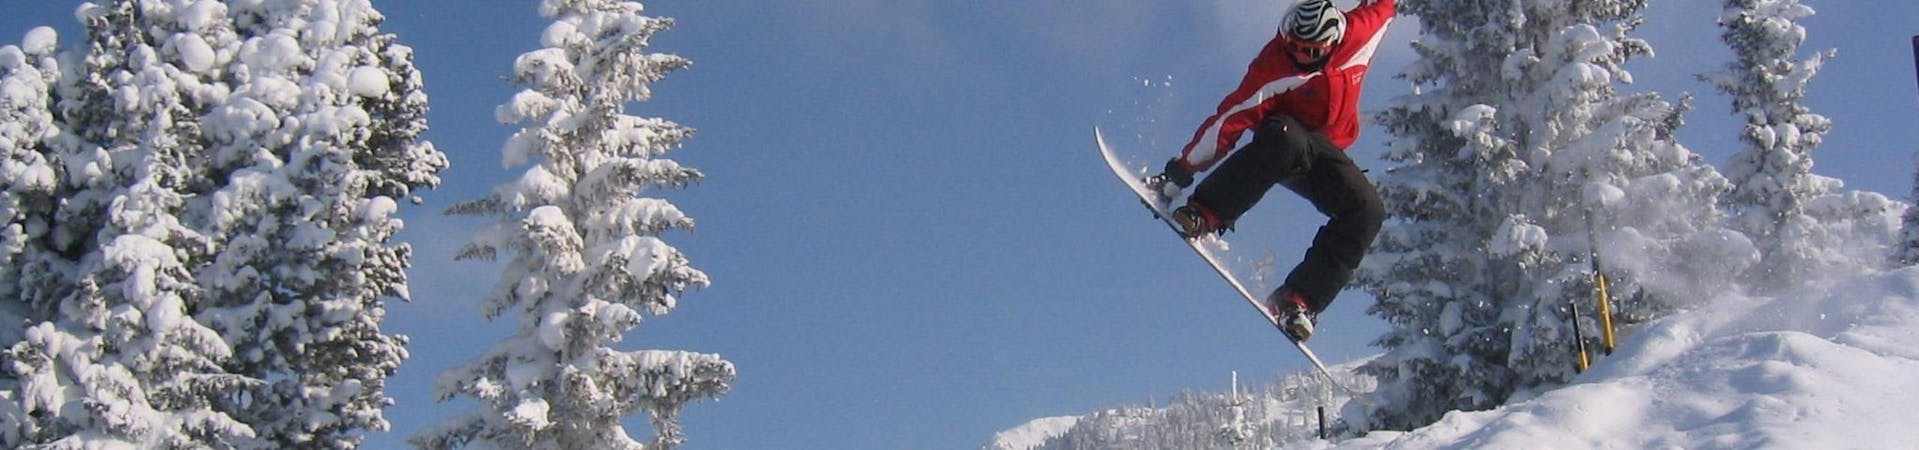 A snowboarder is showing off some impressive tricks during their Private Snowboarding Lessons - All Levels & Ages with the ski school Skischule Lechner in Zell am Ziller.